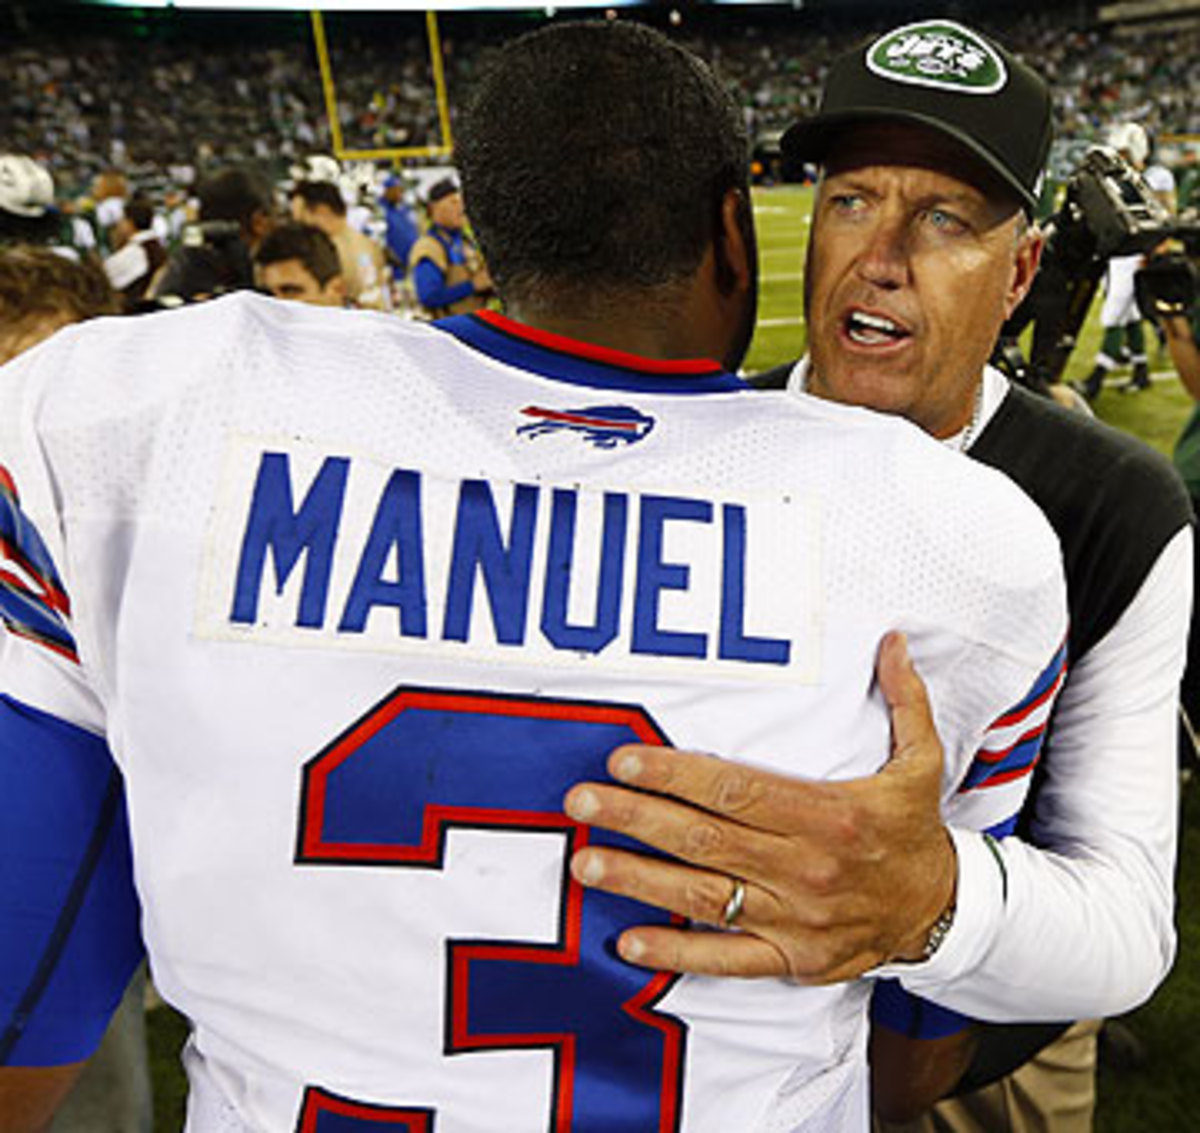 Job one for Rex Ryan as Bills head coach will be finding a starting quarterback for 2015. (Rich Schultz/Getty Images)